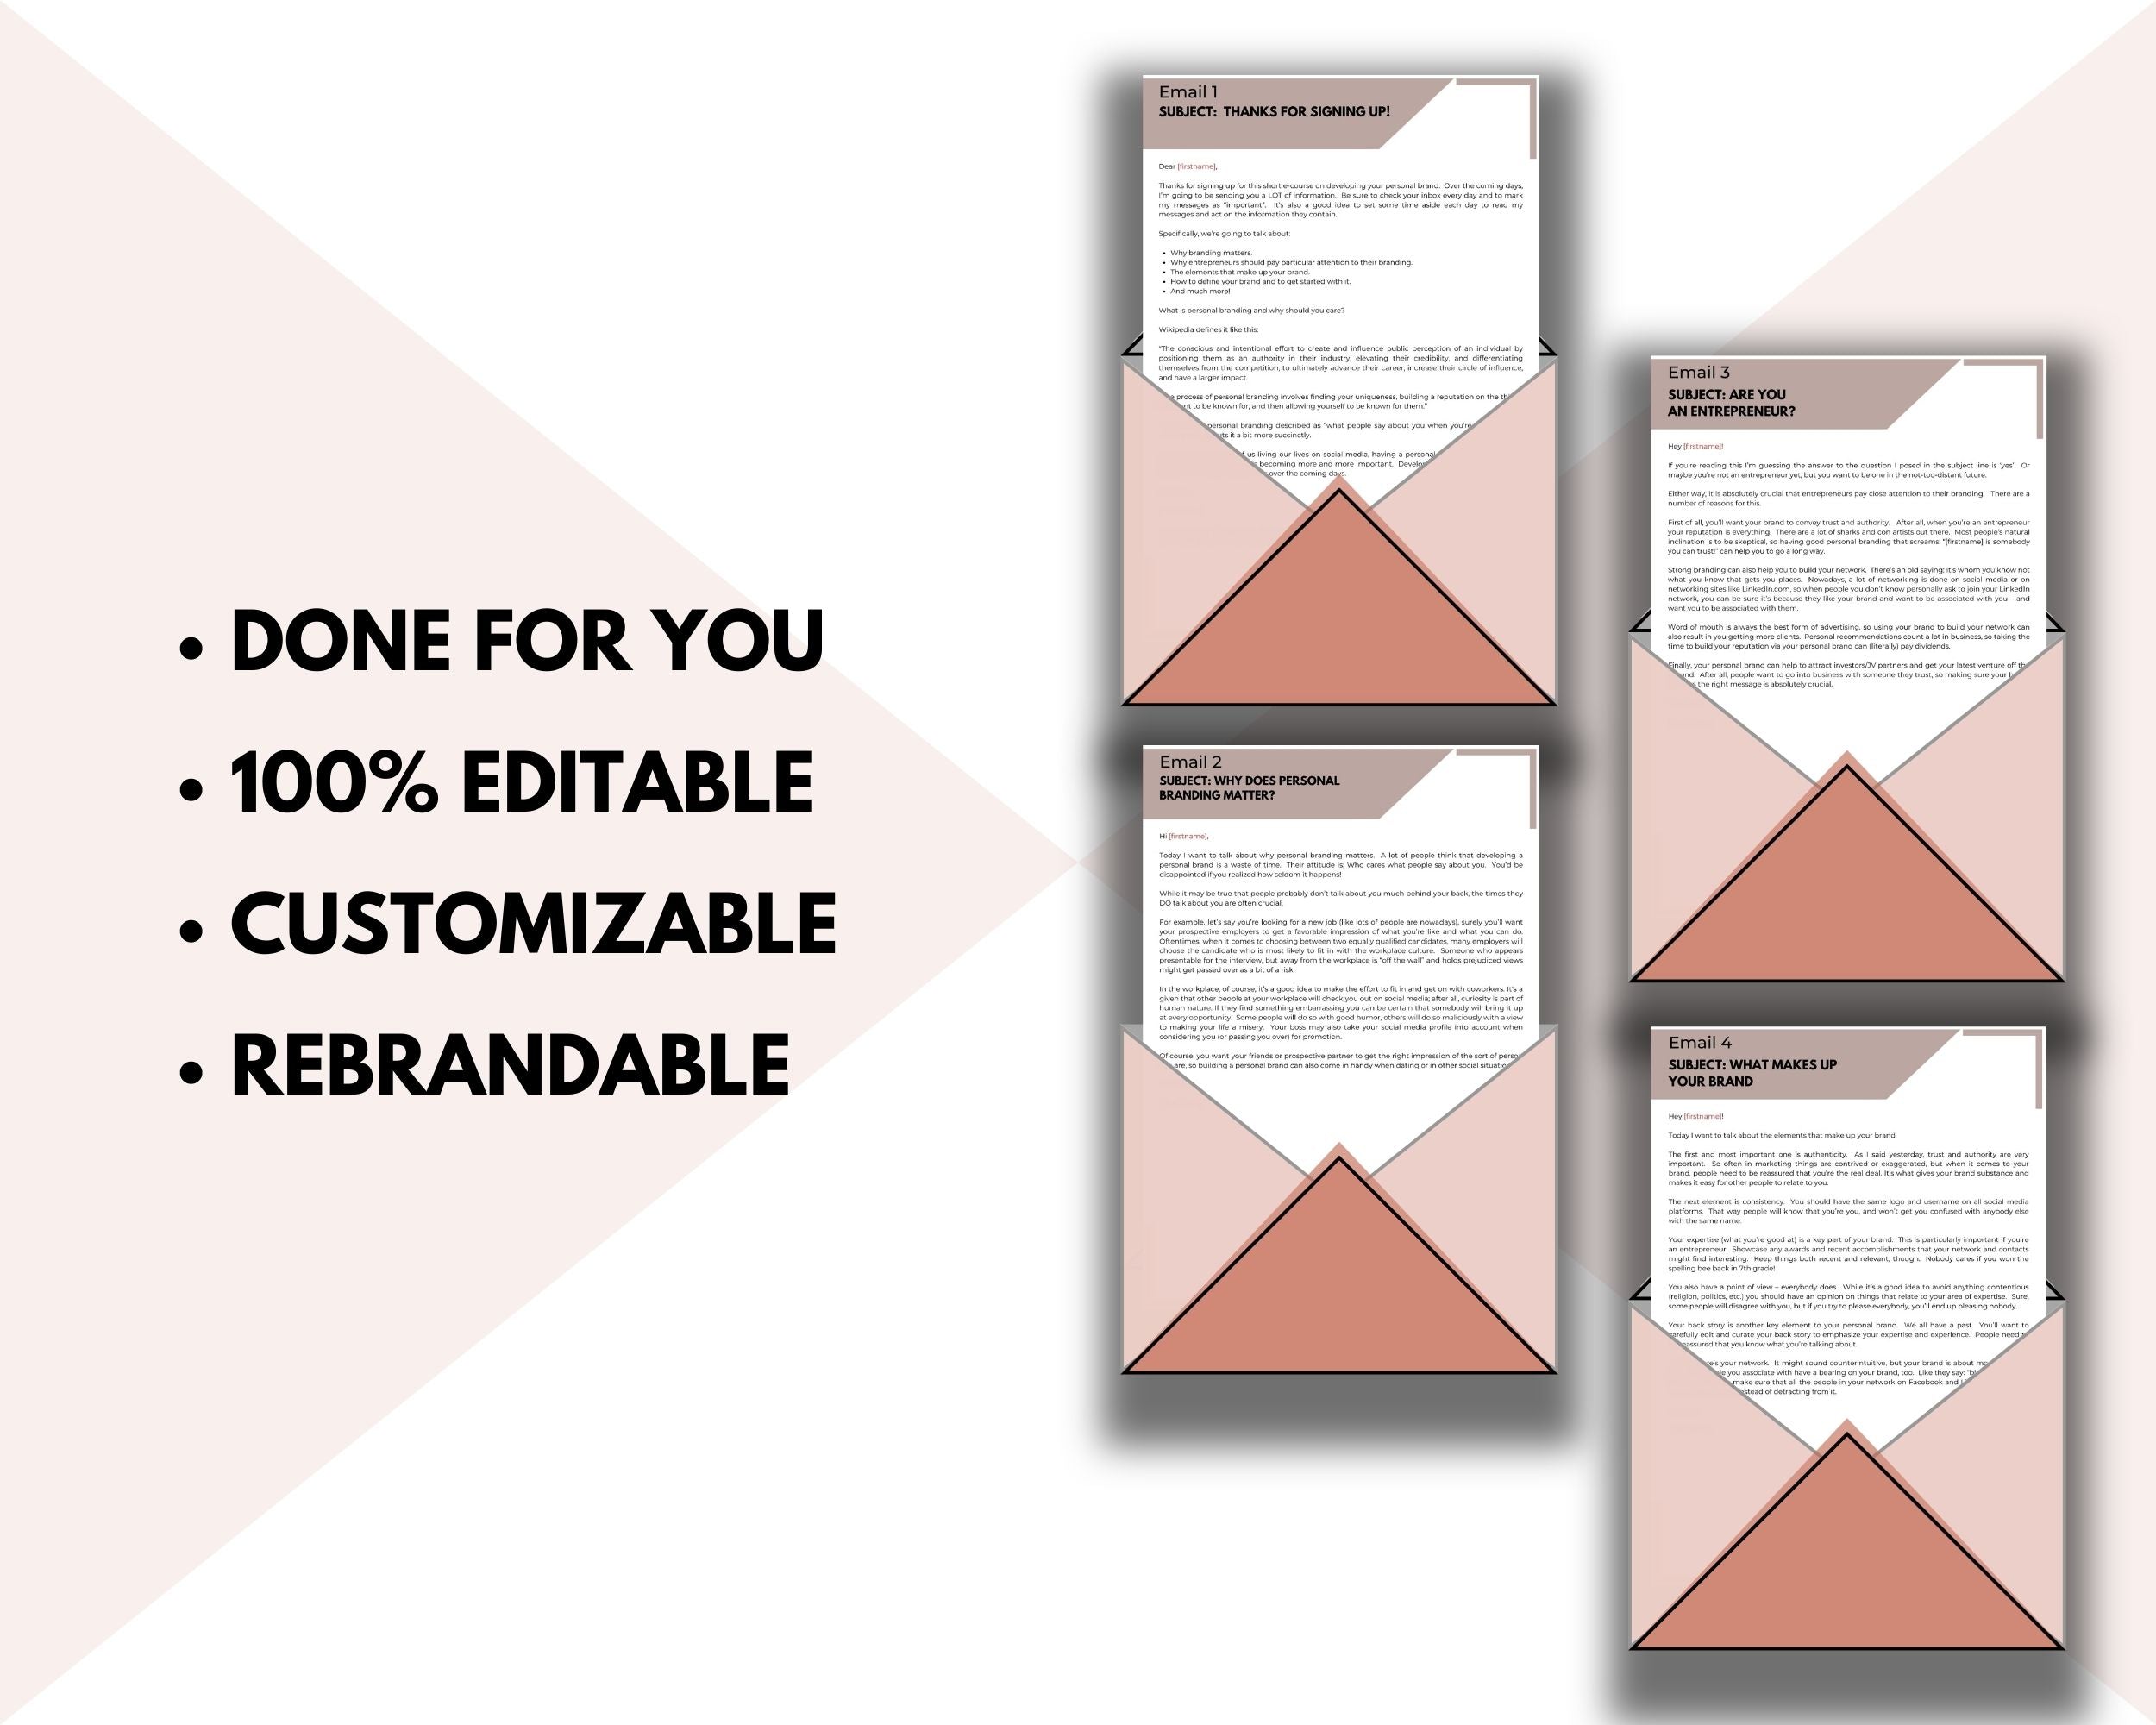 Editable Personal Brand Emails | Rebrandable Done-for-You eCourse